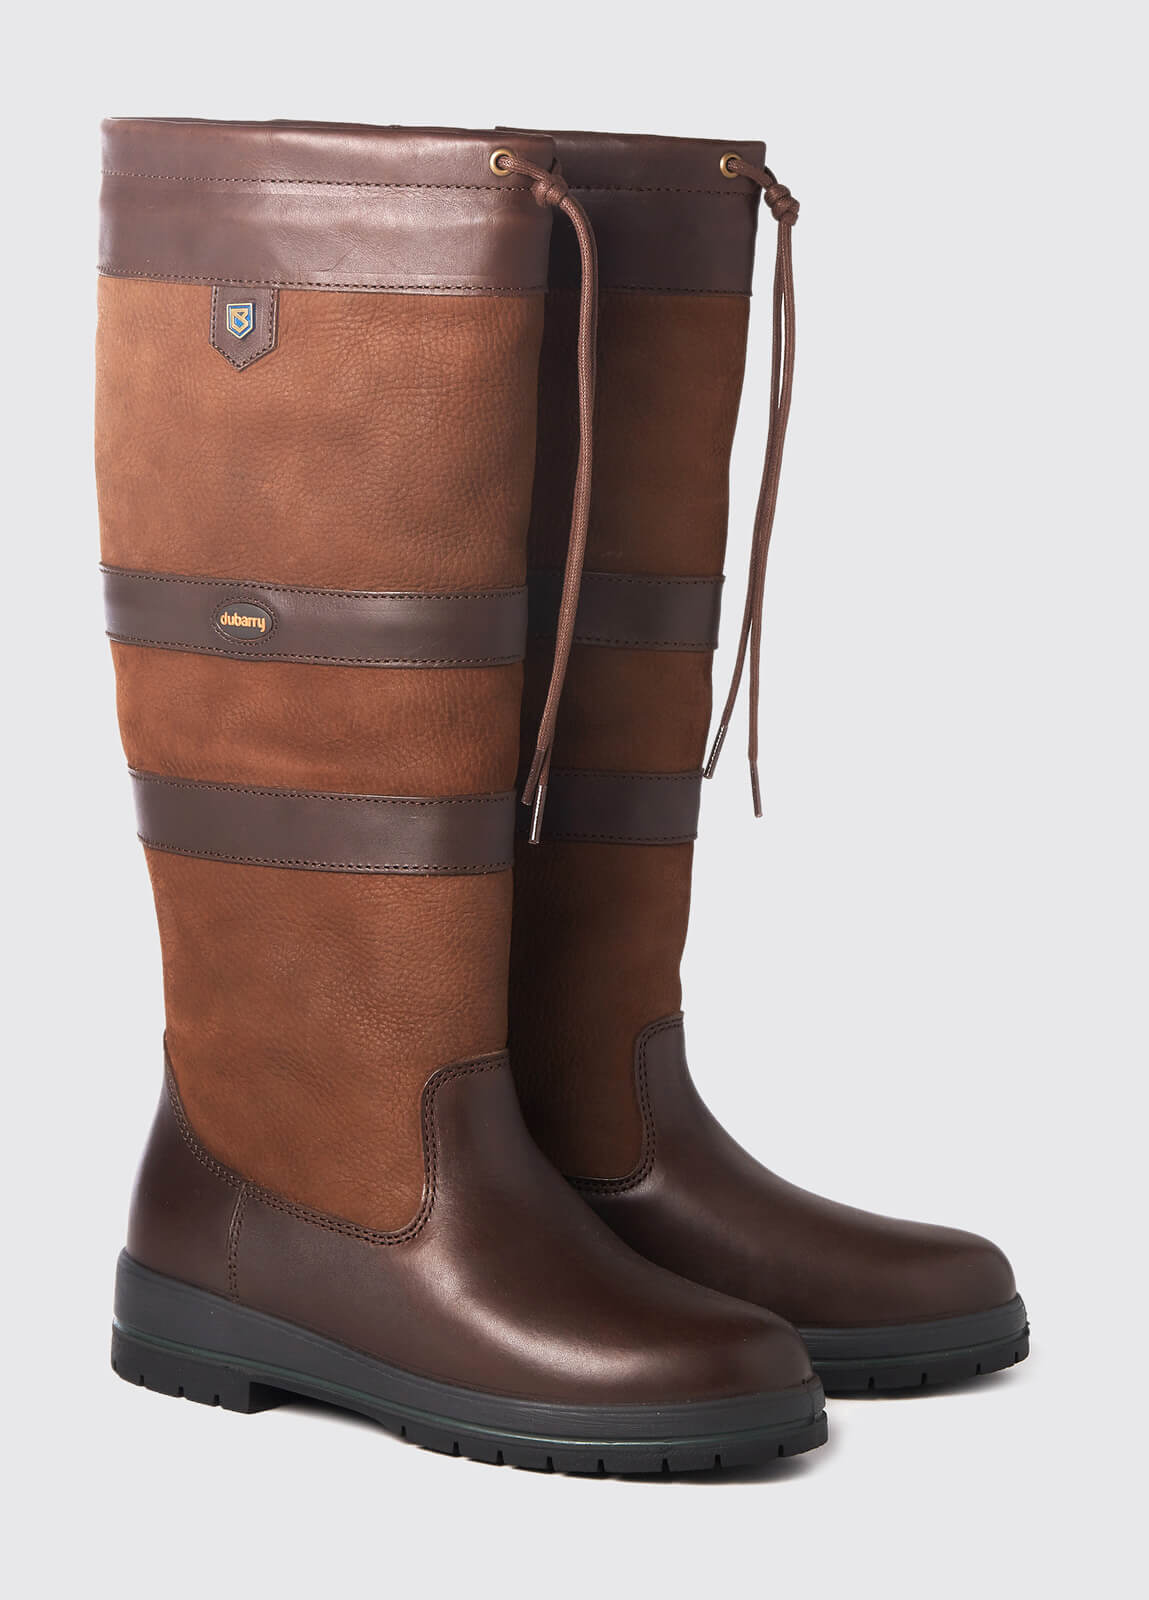 Wider calf fitting Dubarry knee-high walnut brown leather Galway Country Boot with laced top